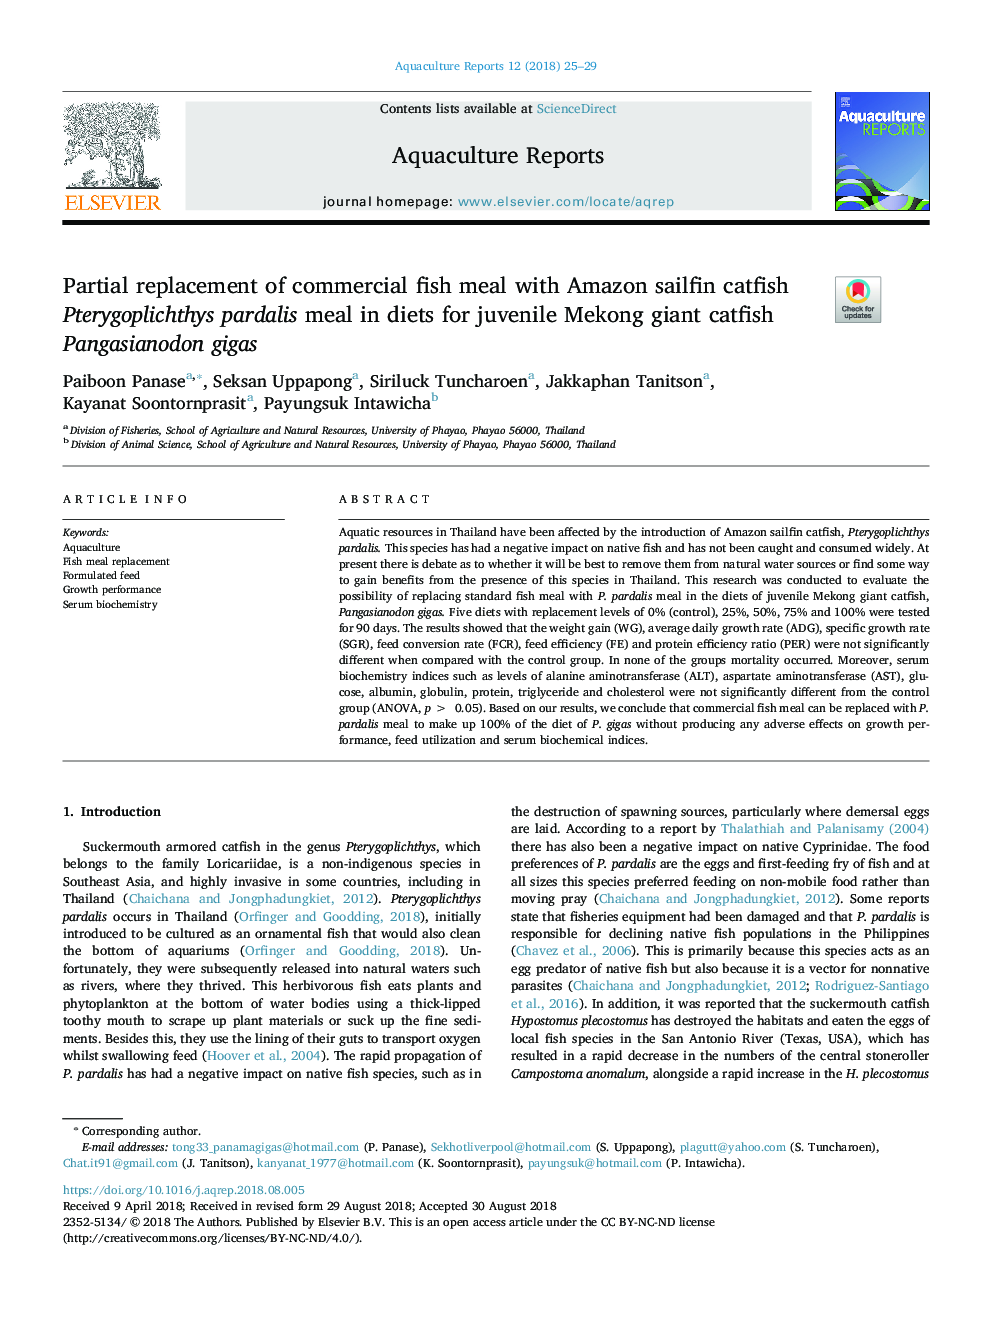 Partial replacement of commercial fish meal with Amazon sailfin catfish Pterygoplichthys pardalis meal in diets for juvenile Mekong giant catfish Pangasianodon gigas